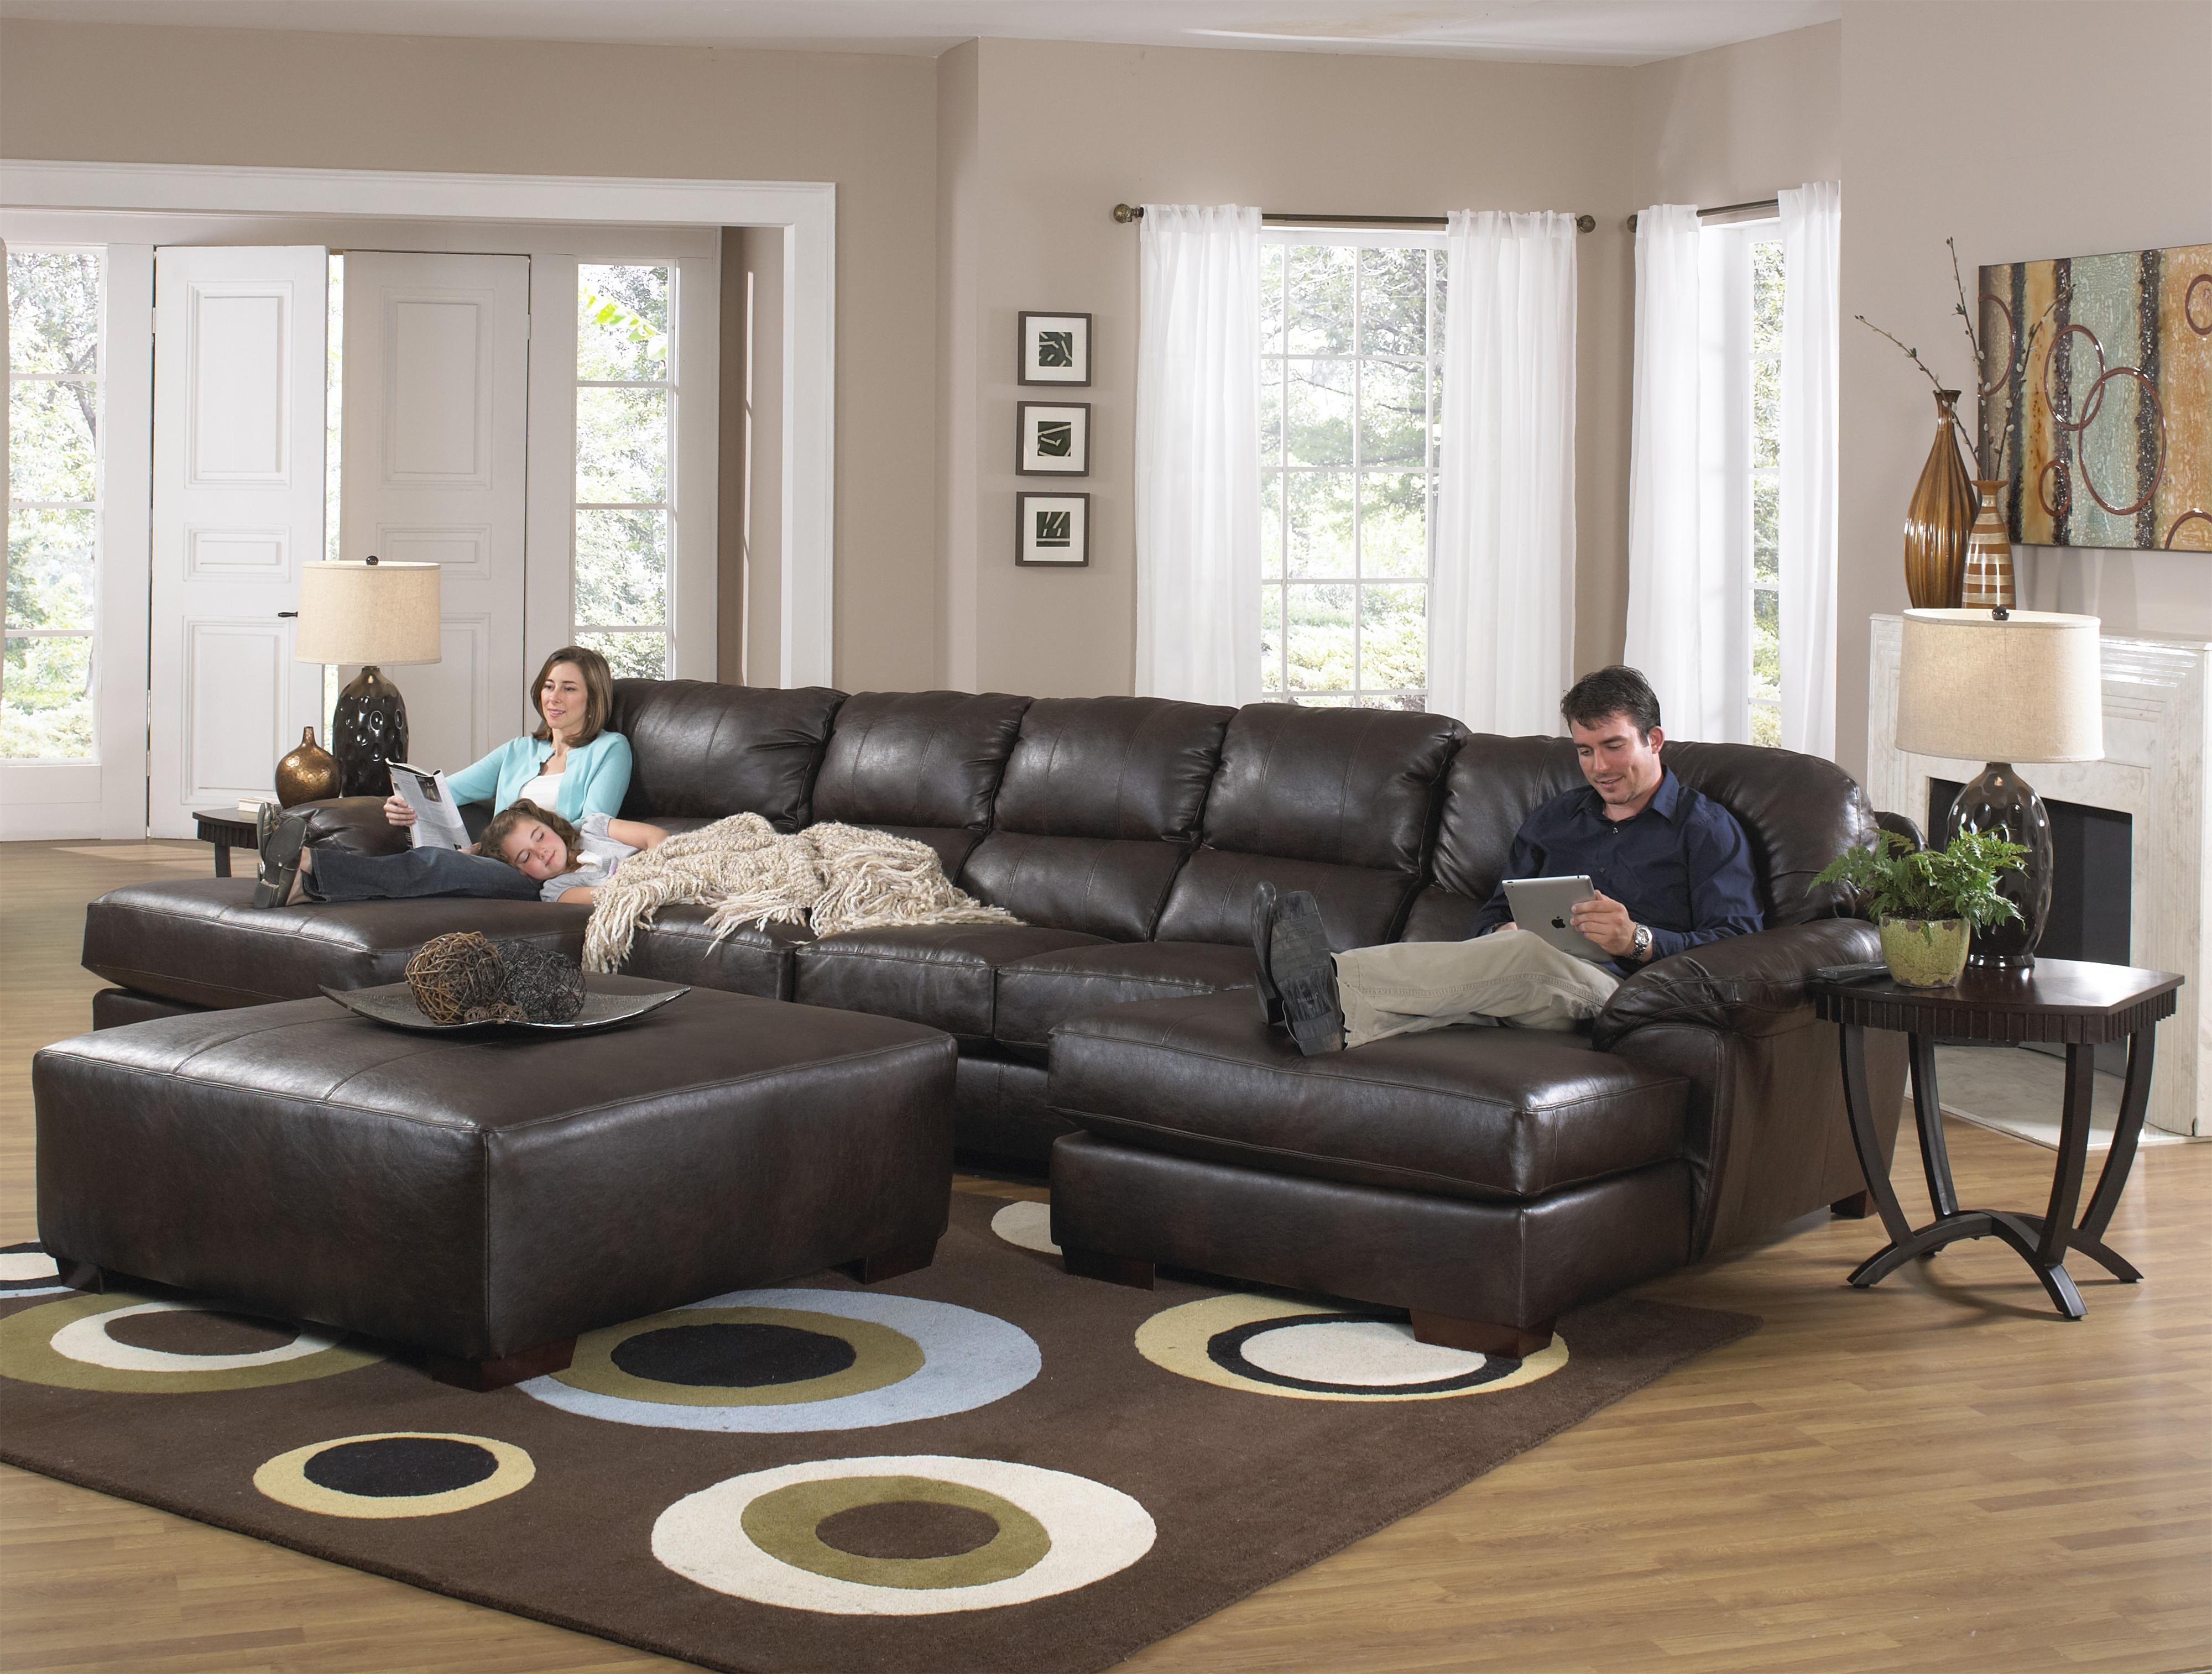 Two Chaise Sectional Sofa With Five Total Seatsjackson Furniture In Long Chaise Sofas (View 7 of 10)